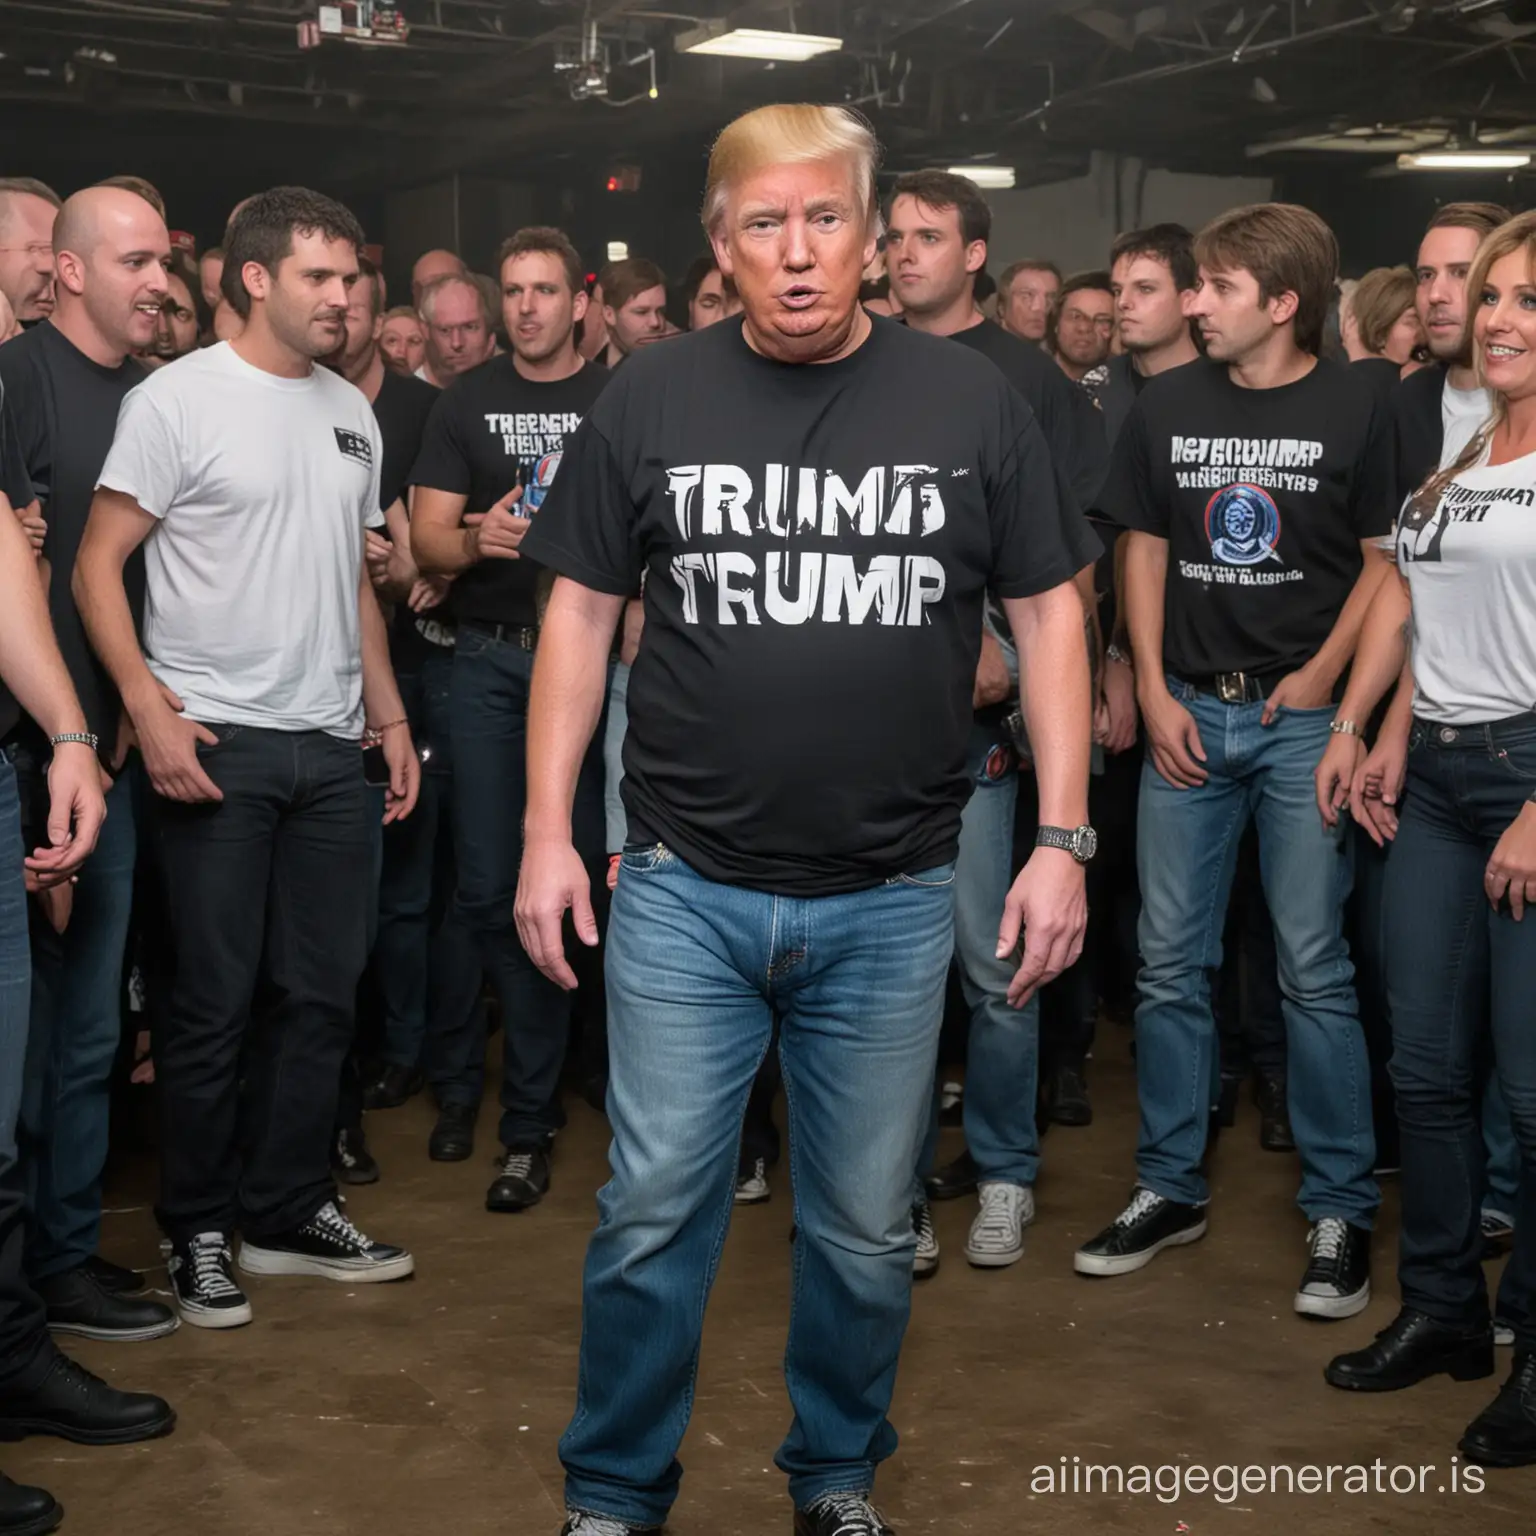 Donald Trump at the techno rave. He's wearing a T-shirt and jeans.